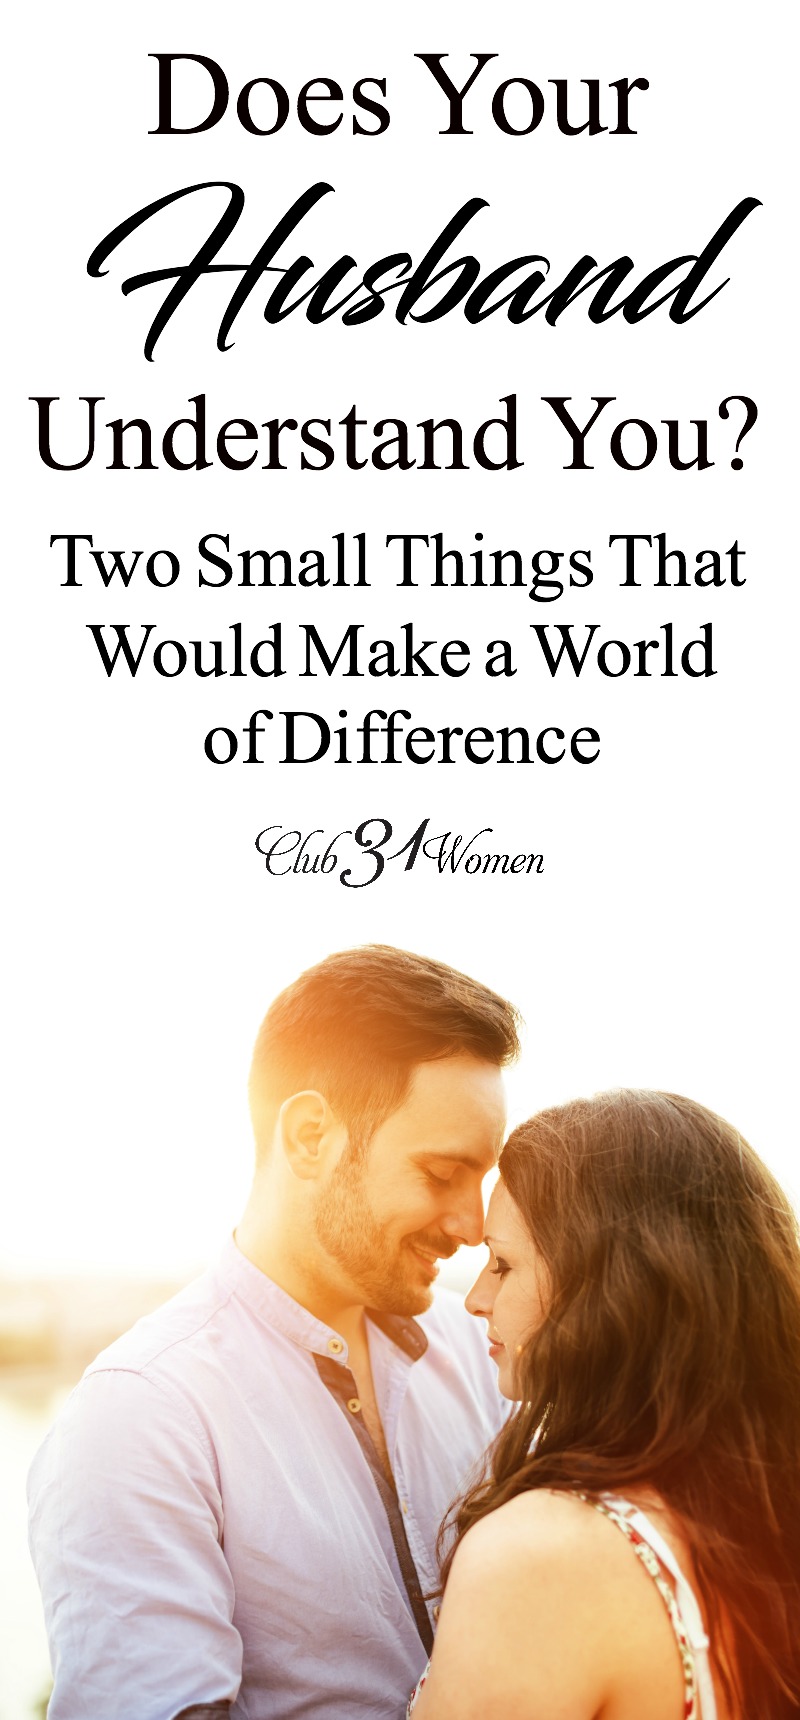 It can be a challenge for a husband to understand his wife! He wants to understand her...but just can't figure her out. Here are 2 very helpful suggestions! via @Club31Women